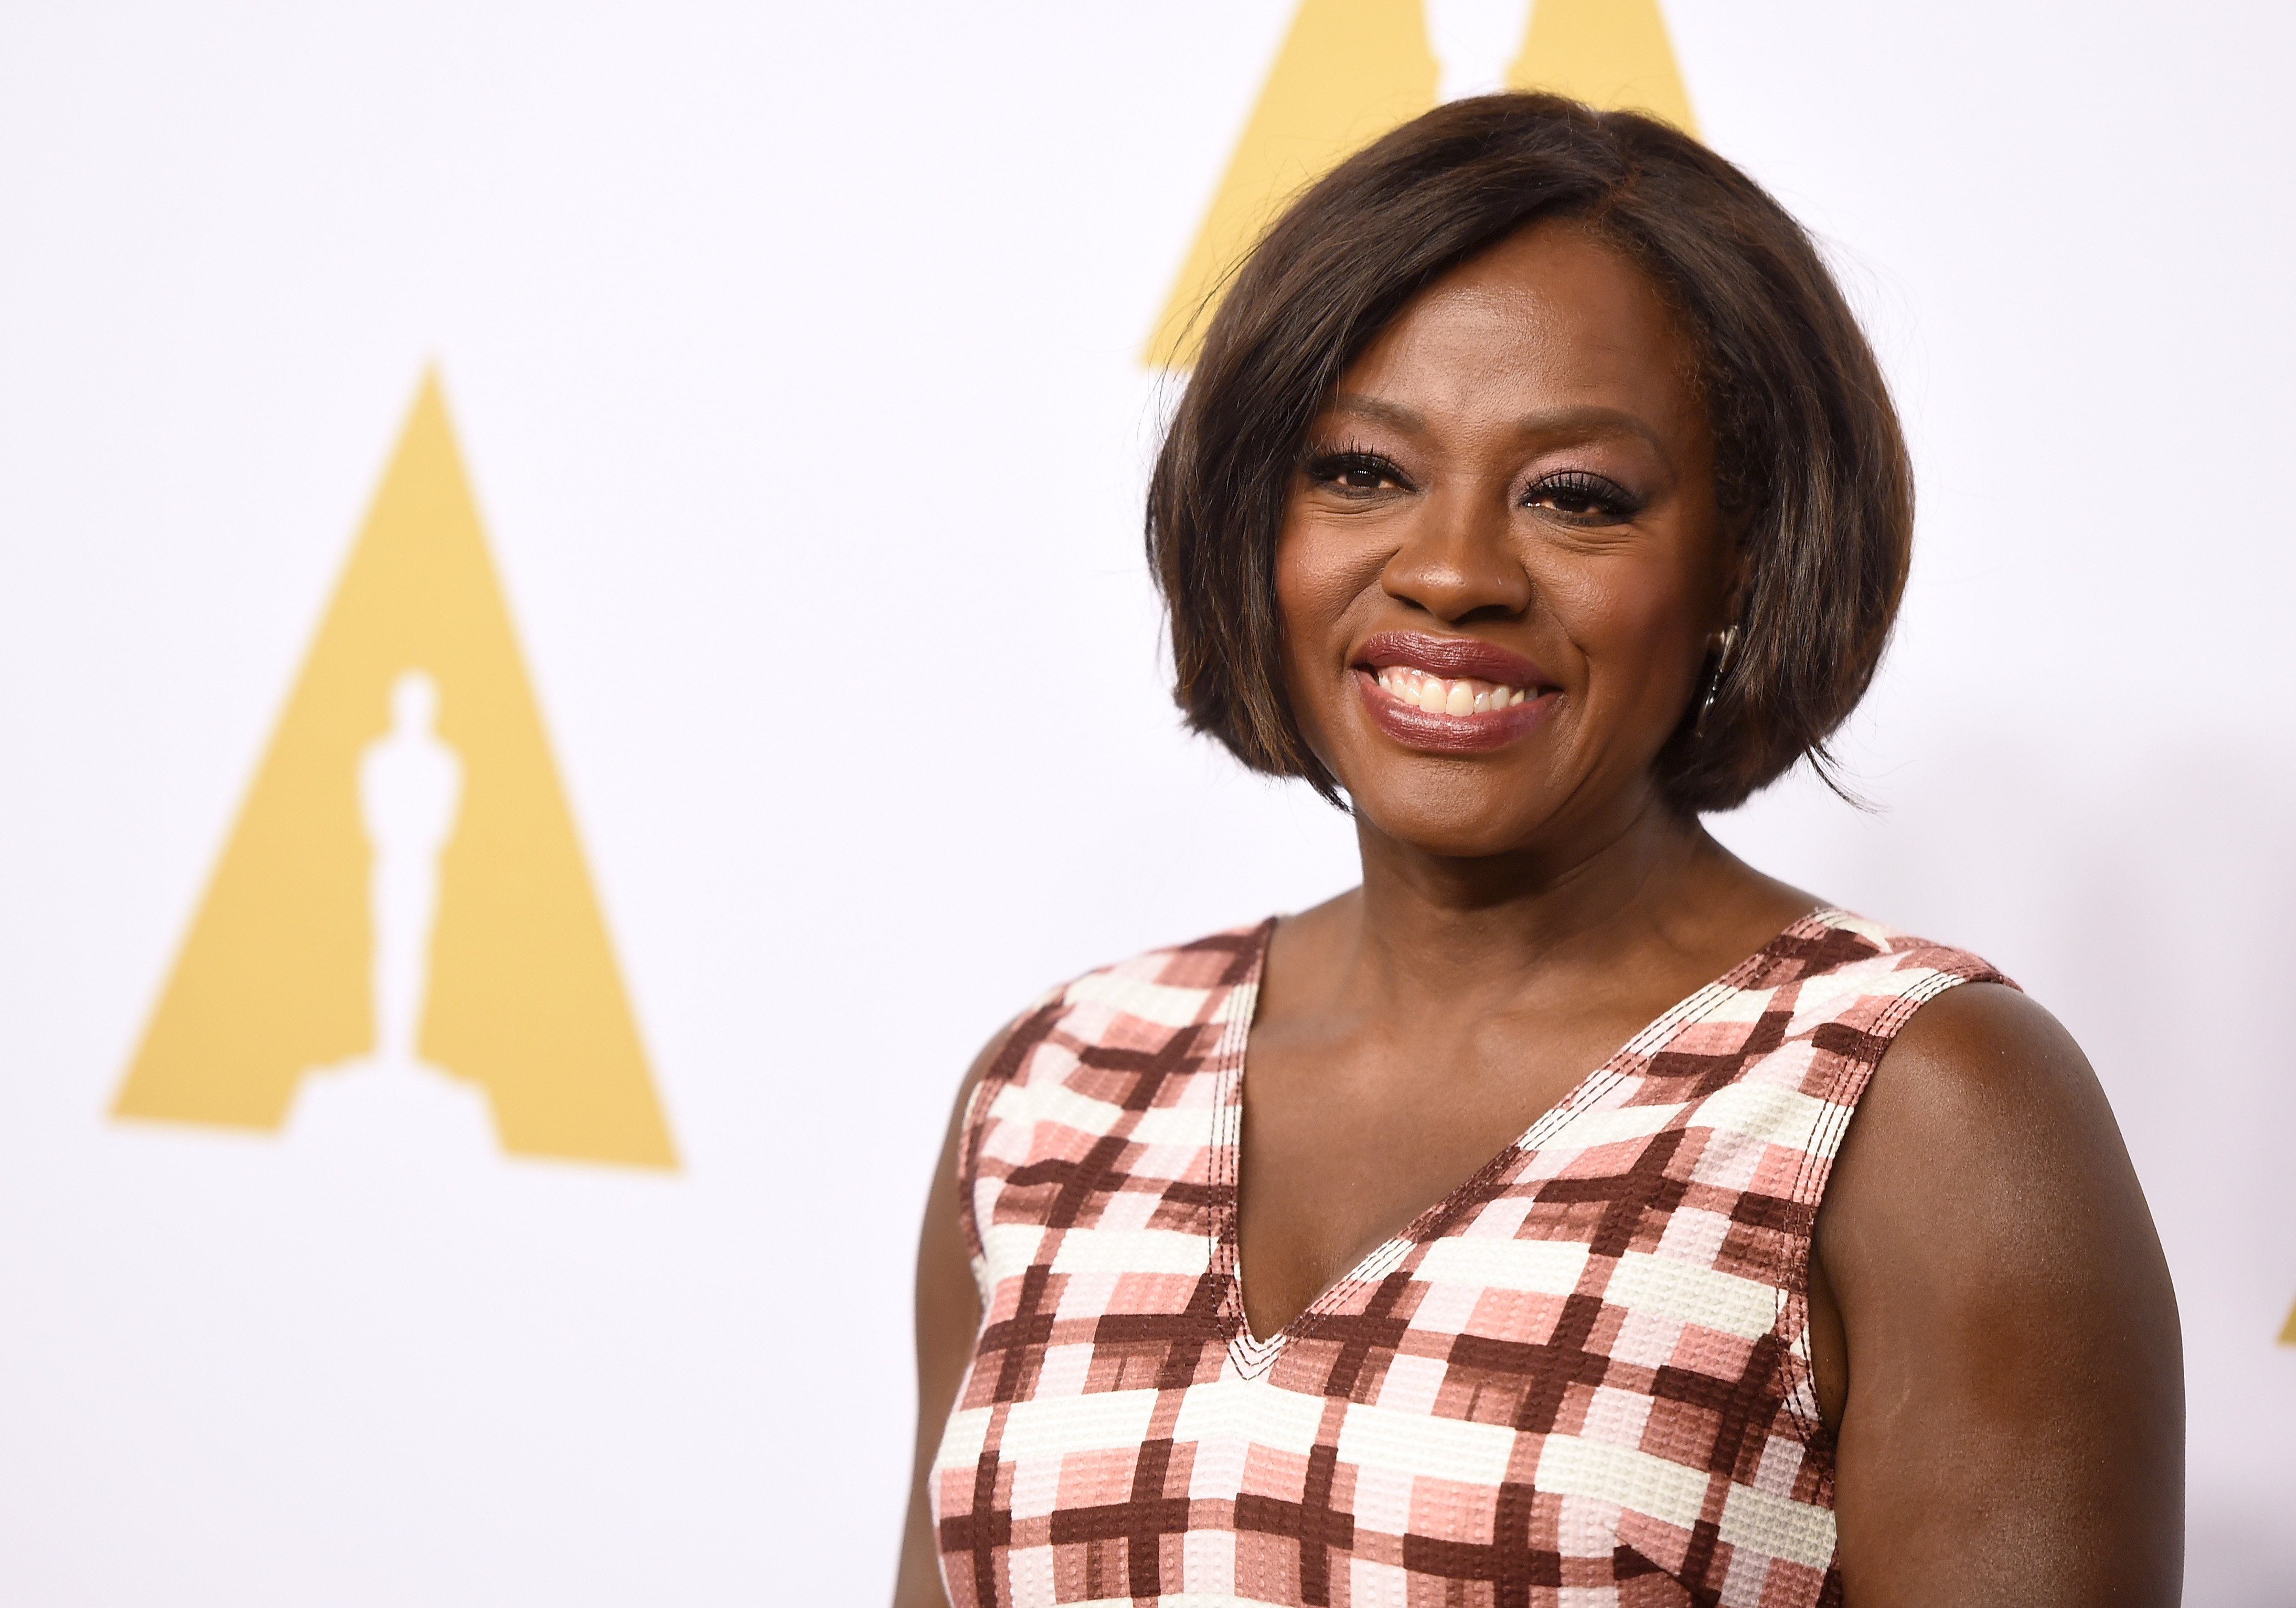 Viola Davis at the 89th Annual Academy Awards Nominee Luncheon on February 6, 2017 in Beverly Hills, California. | Source: Getty Images